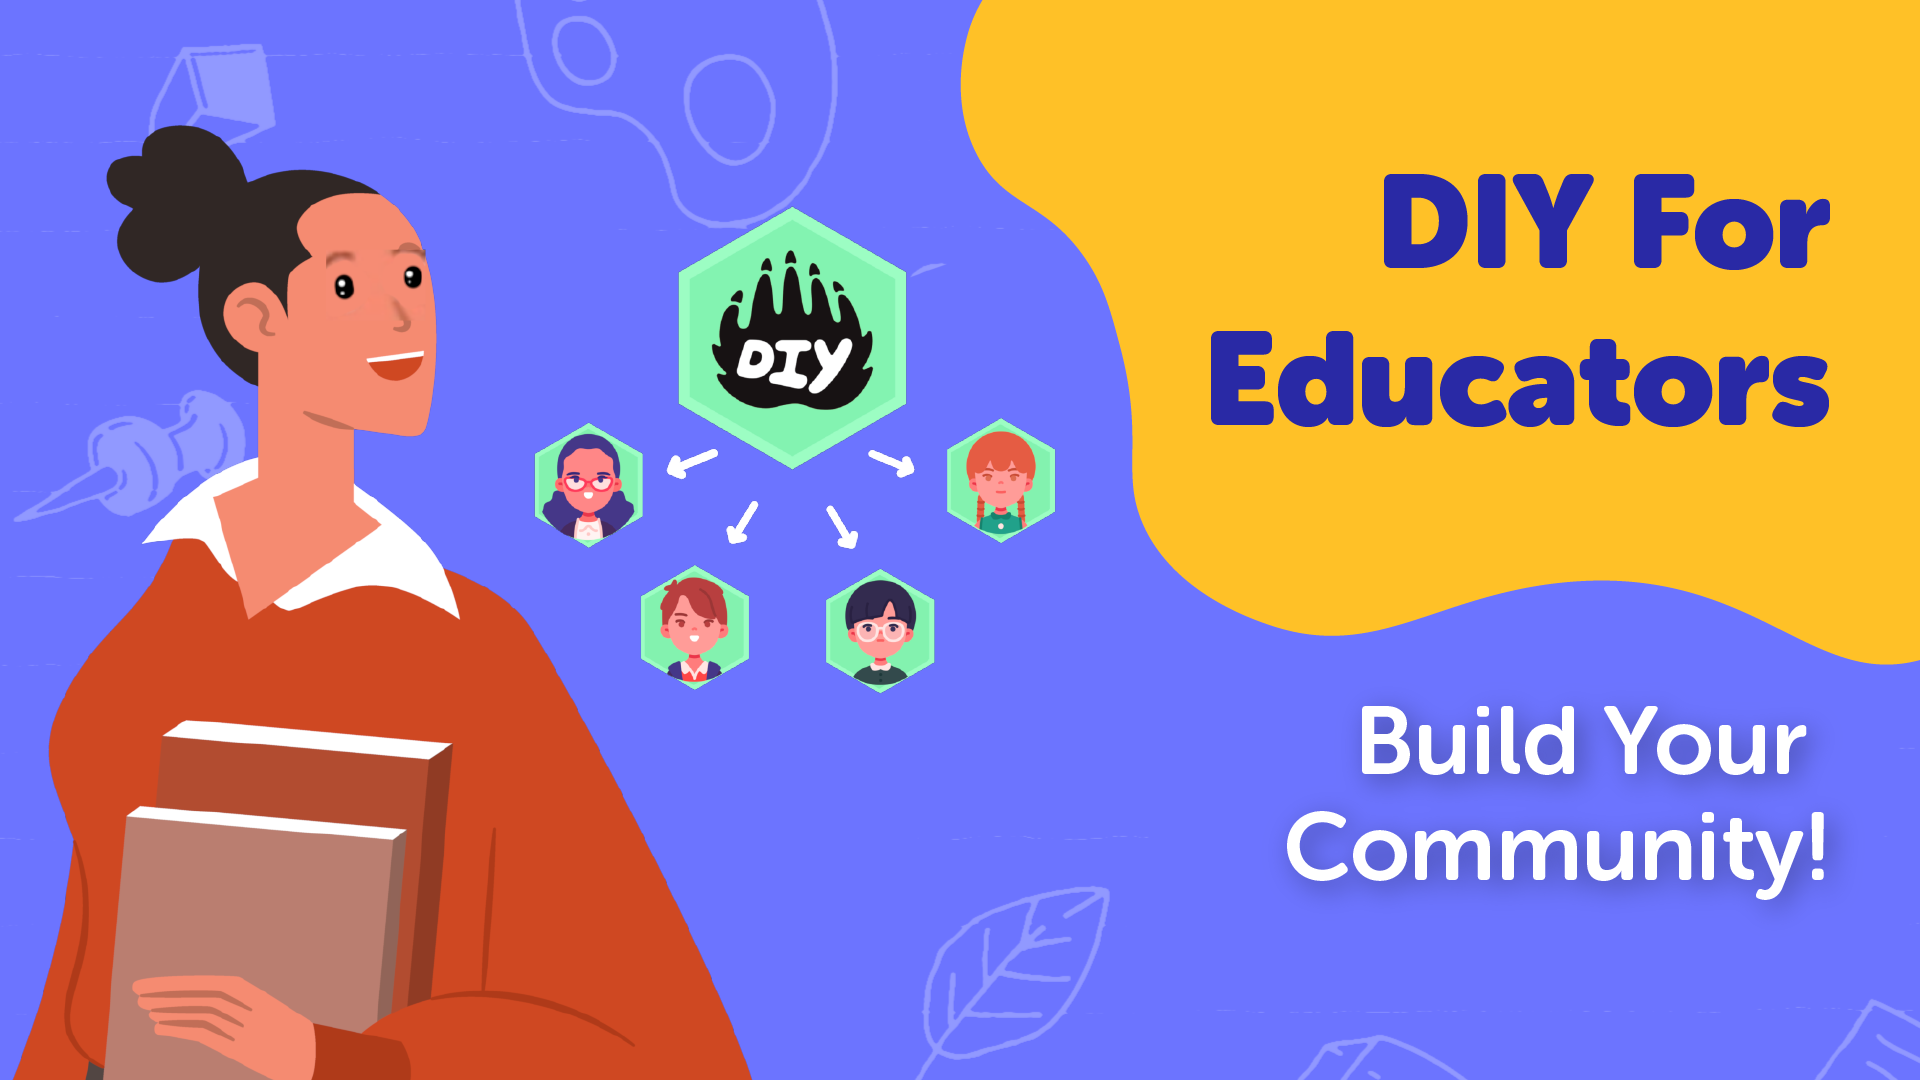 DIY.org Launches Platform for Educators Worldwide, Grants Free Access for Life